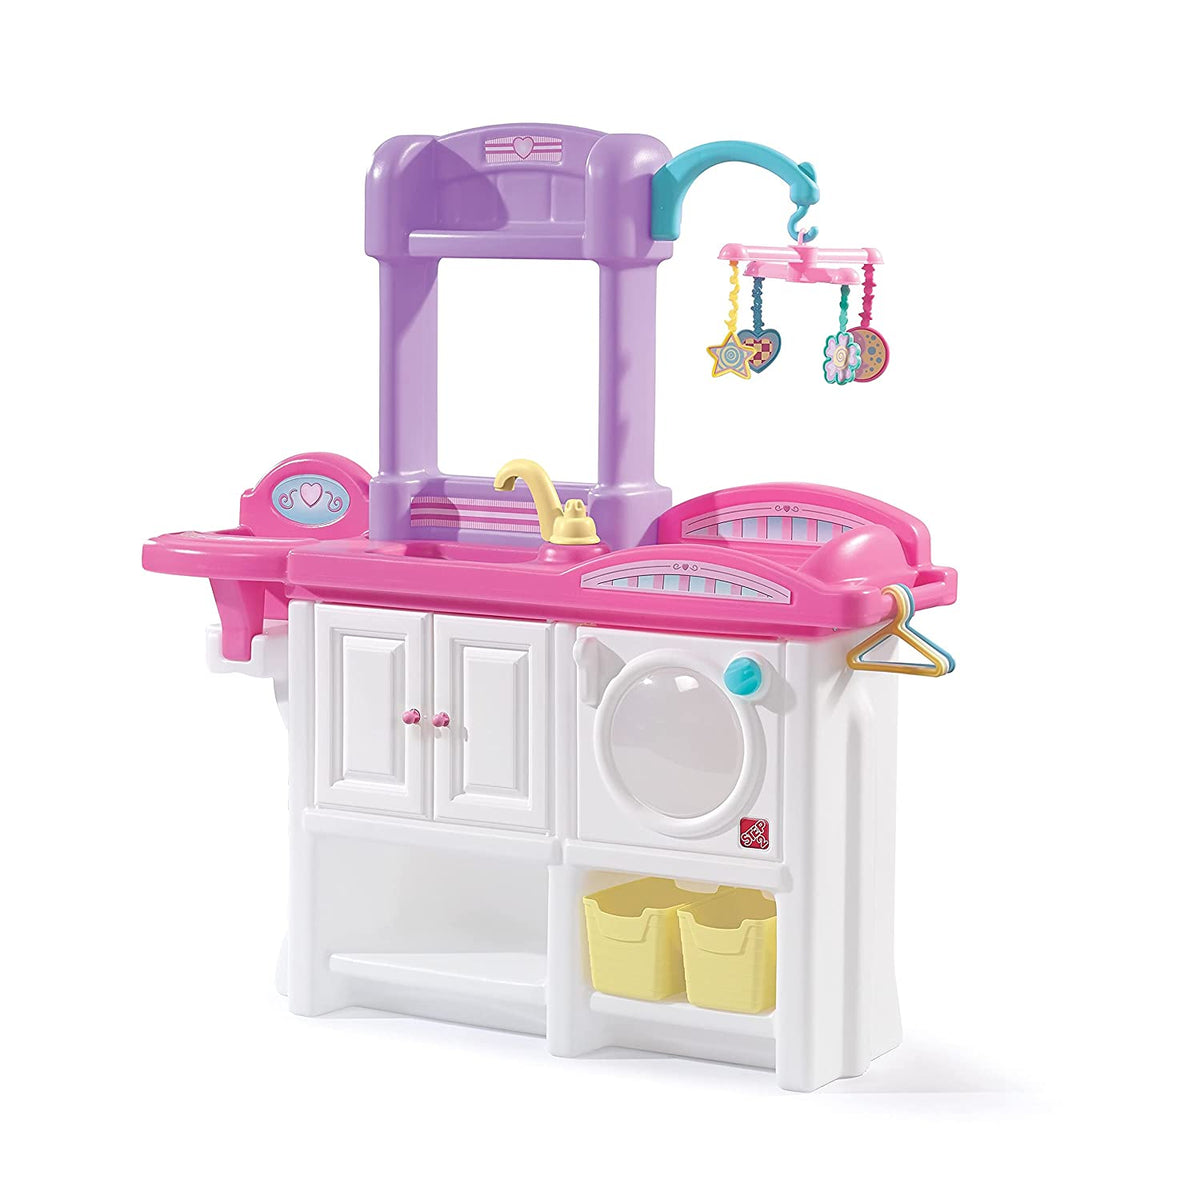 Step2 Love and Care Deluxe Nursery Roleplay Toy for Kids